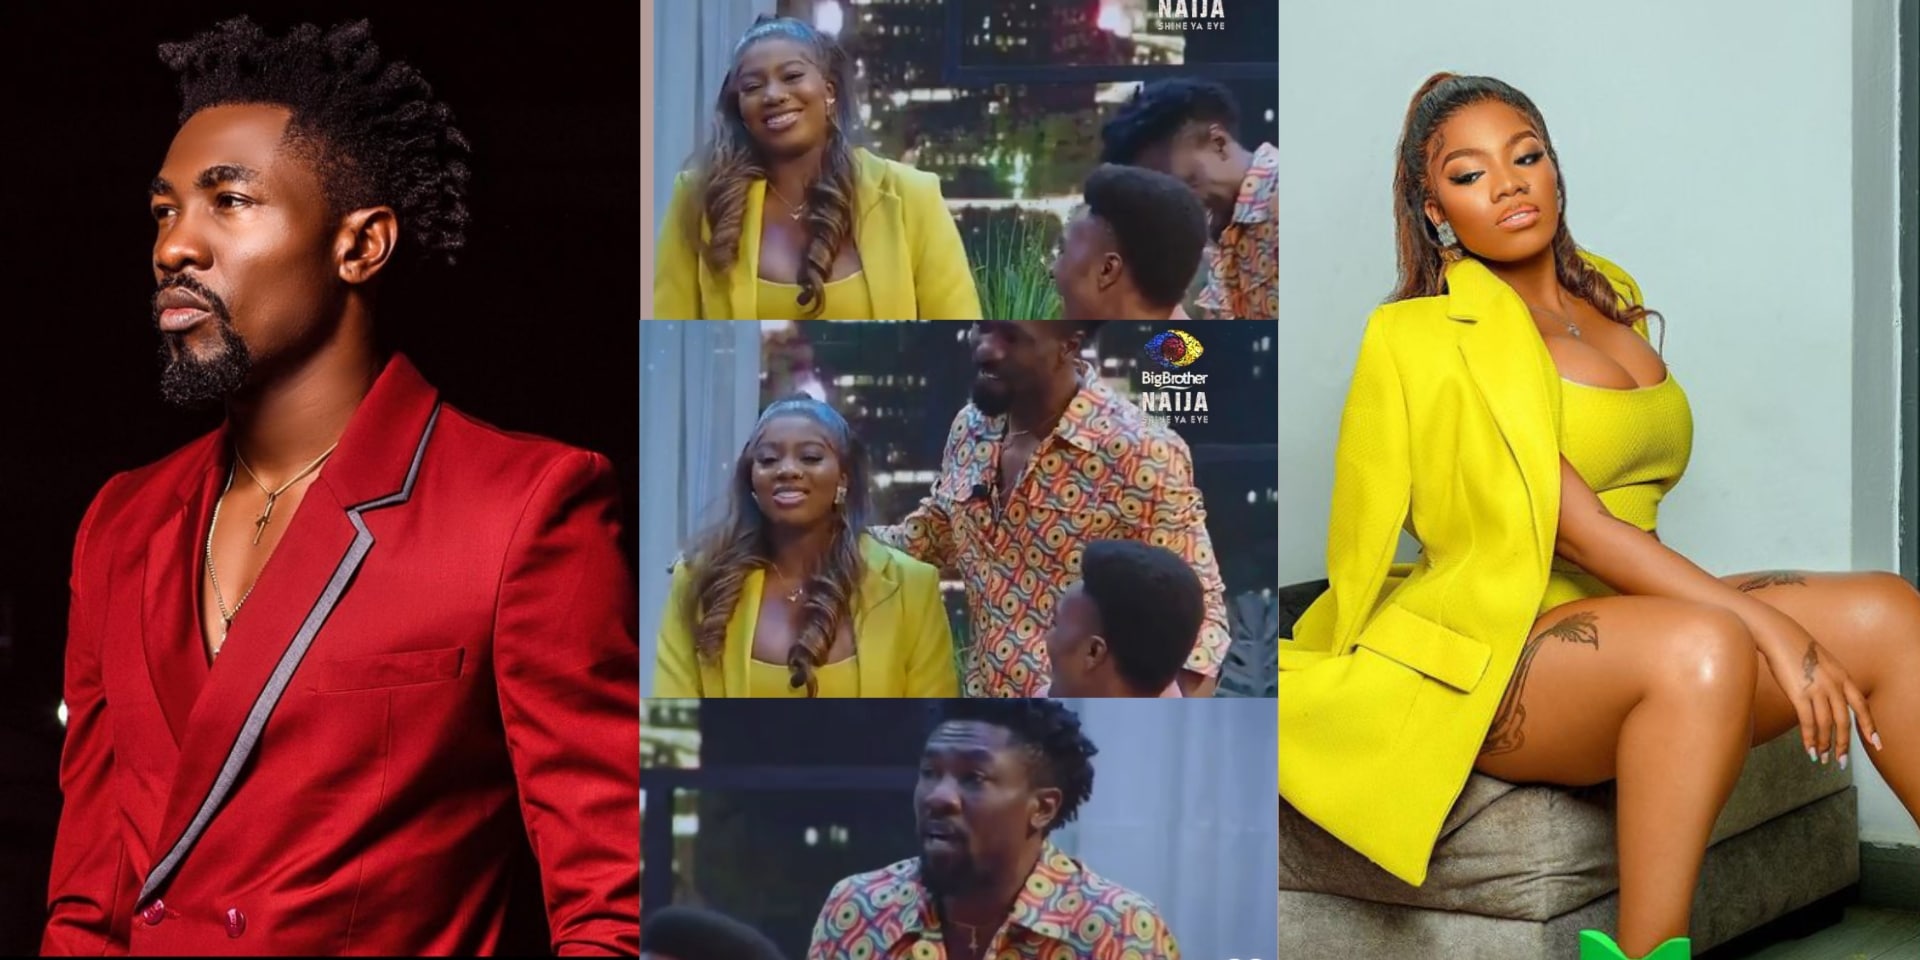 #BBNaijaReunion: Heartwarming moment Boma Akpore apologized to Angel over their altercation in Biggie's house (Video)